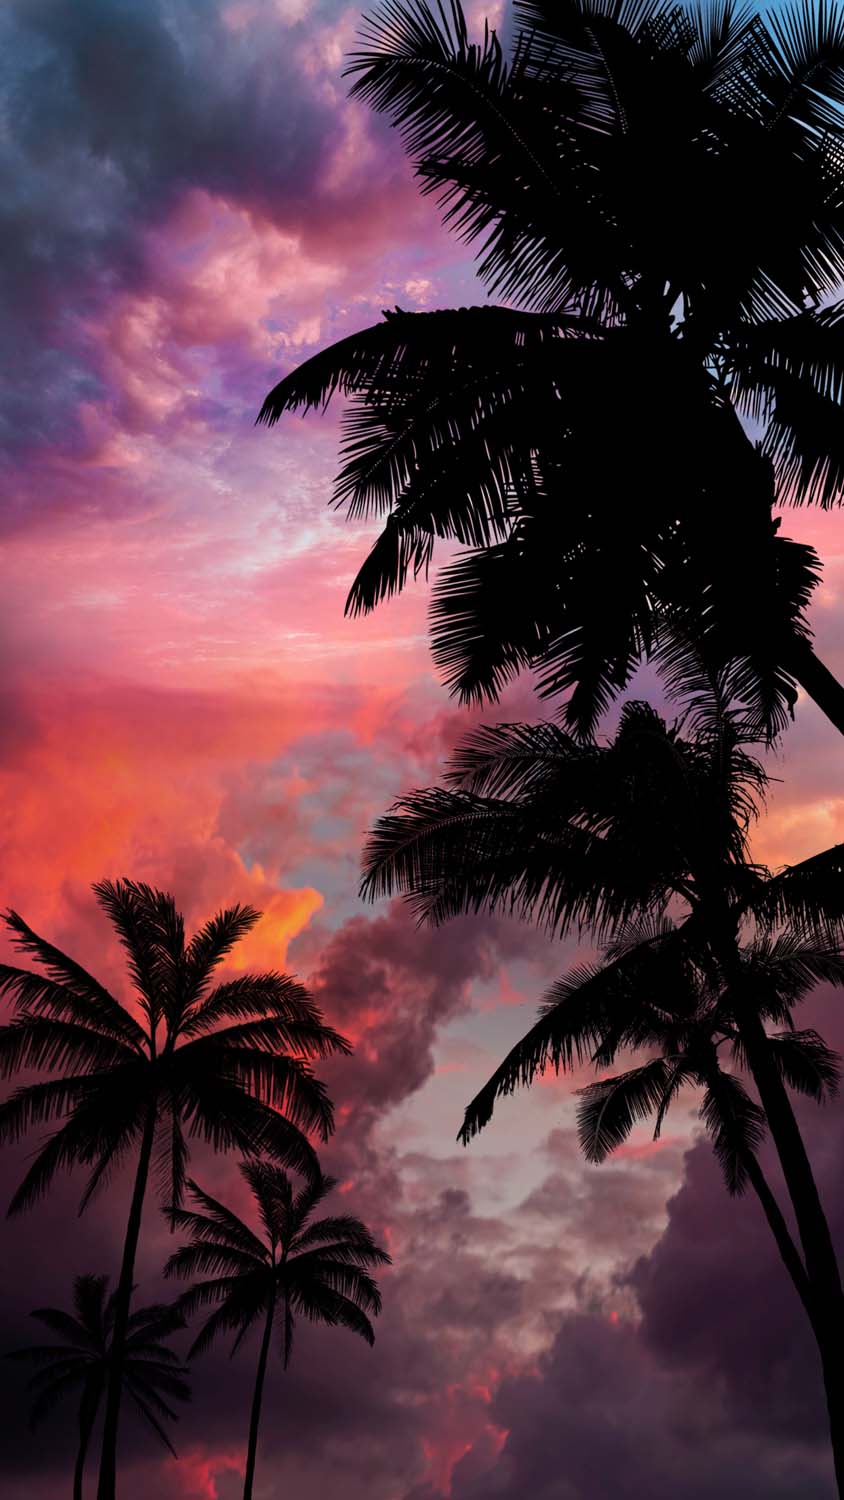 Palm Trees Sunset IPhone Wallpaper HD - IPhone Wallpapers : iPhone  Wallpapers